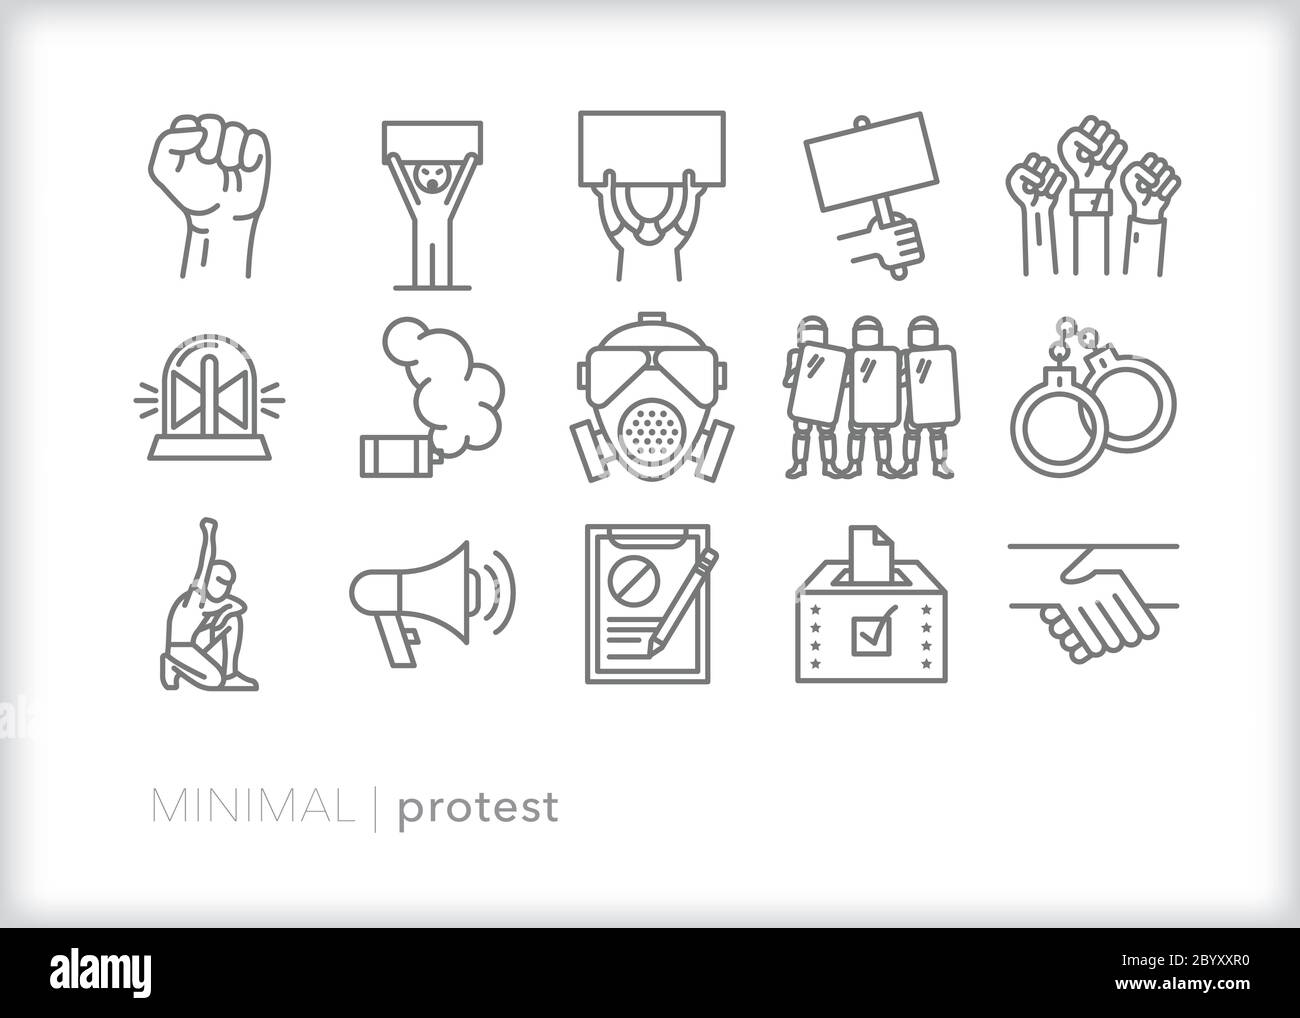 Set of protest line icons for demonstrating first amendment right of free speech in a democracy while facing police enforcement Stock Vector